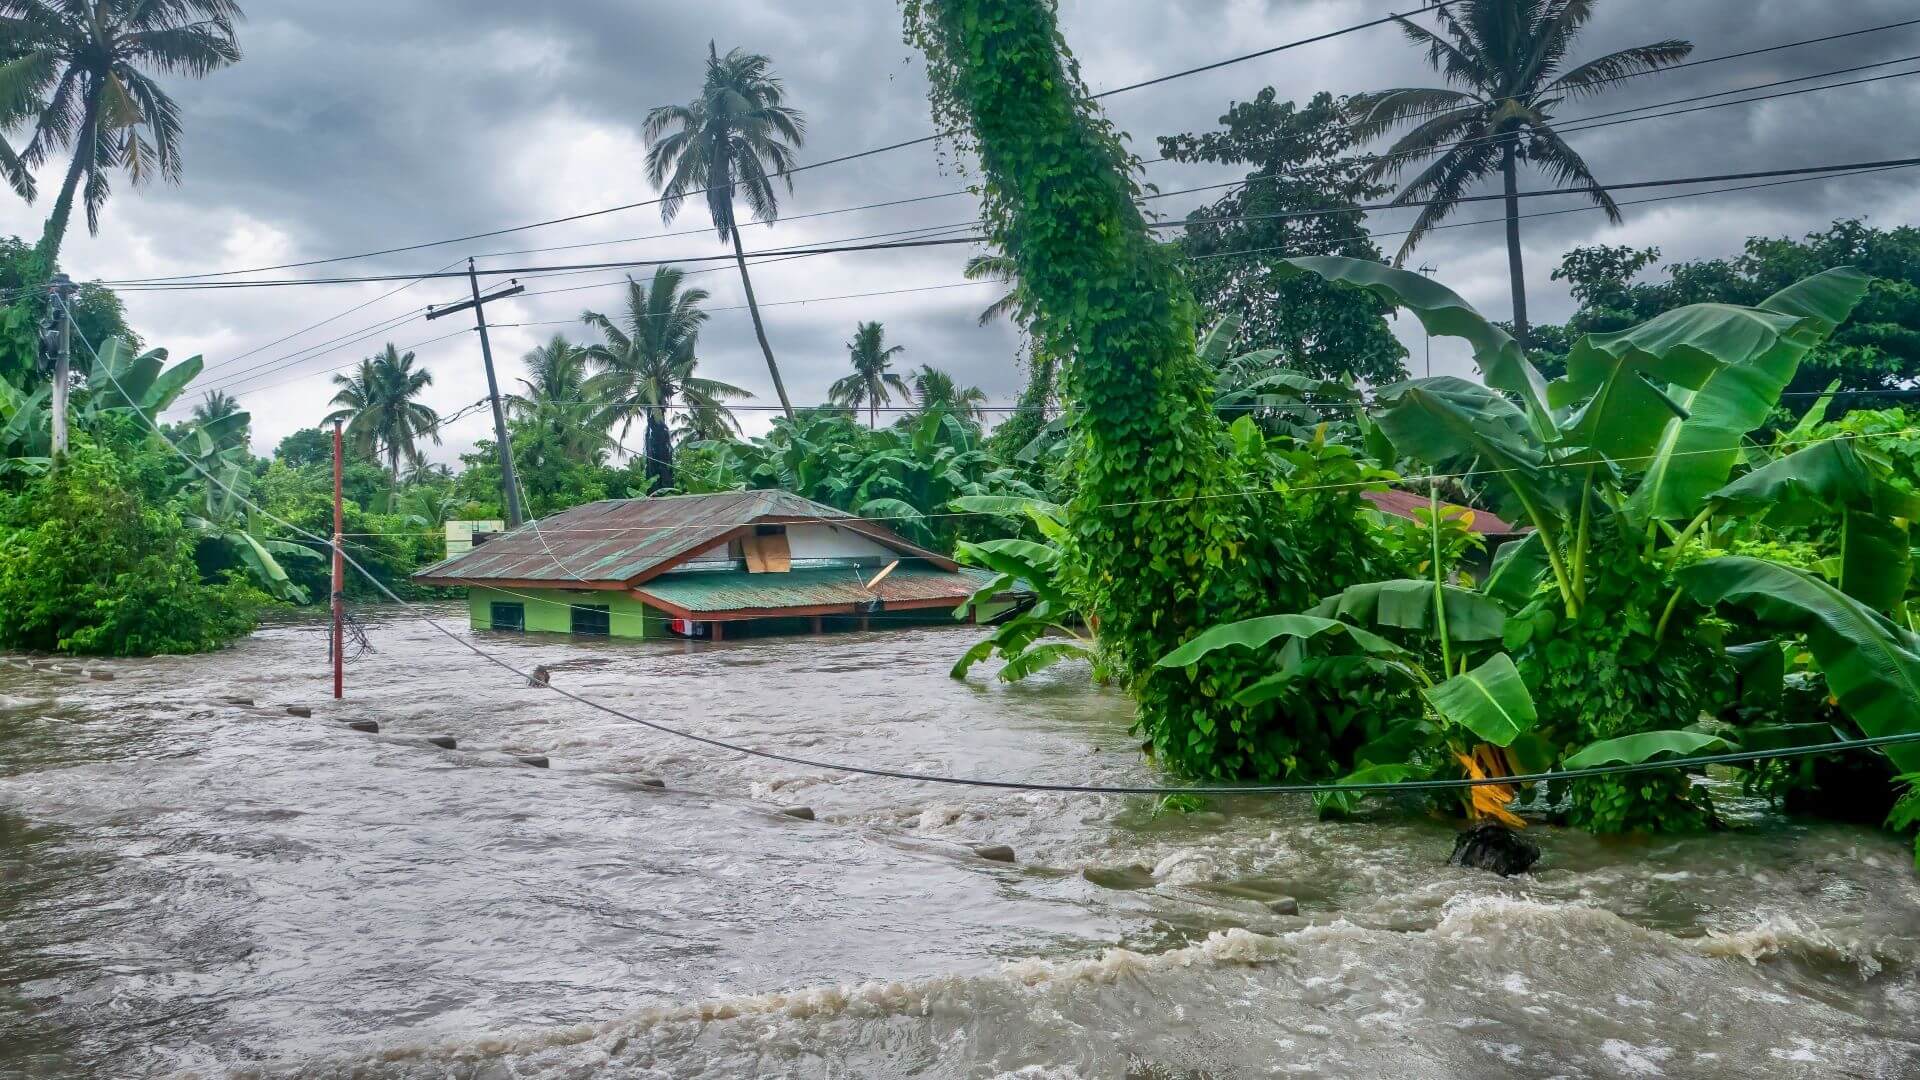 Flooded village in the Philippines